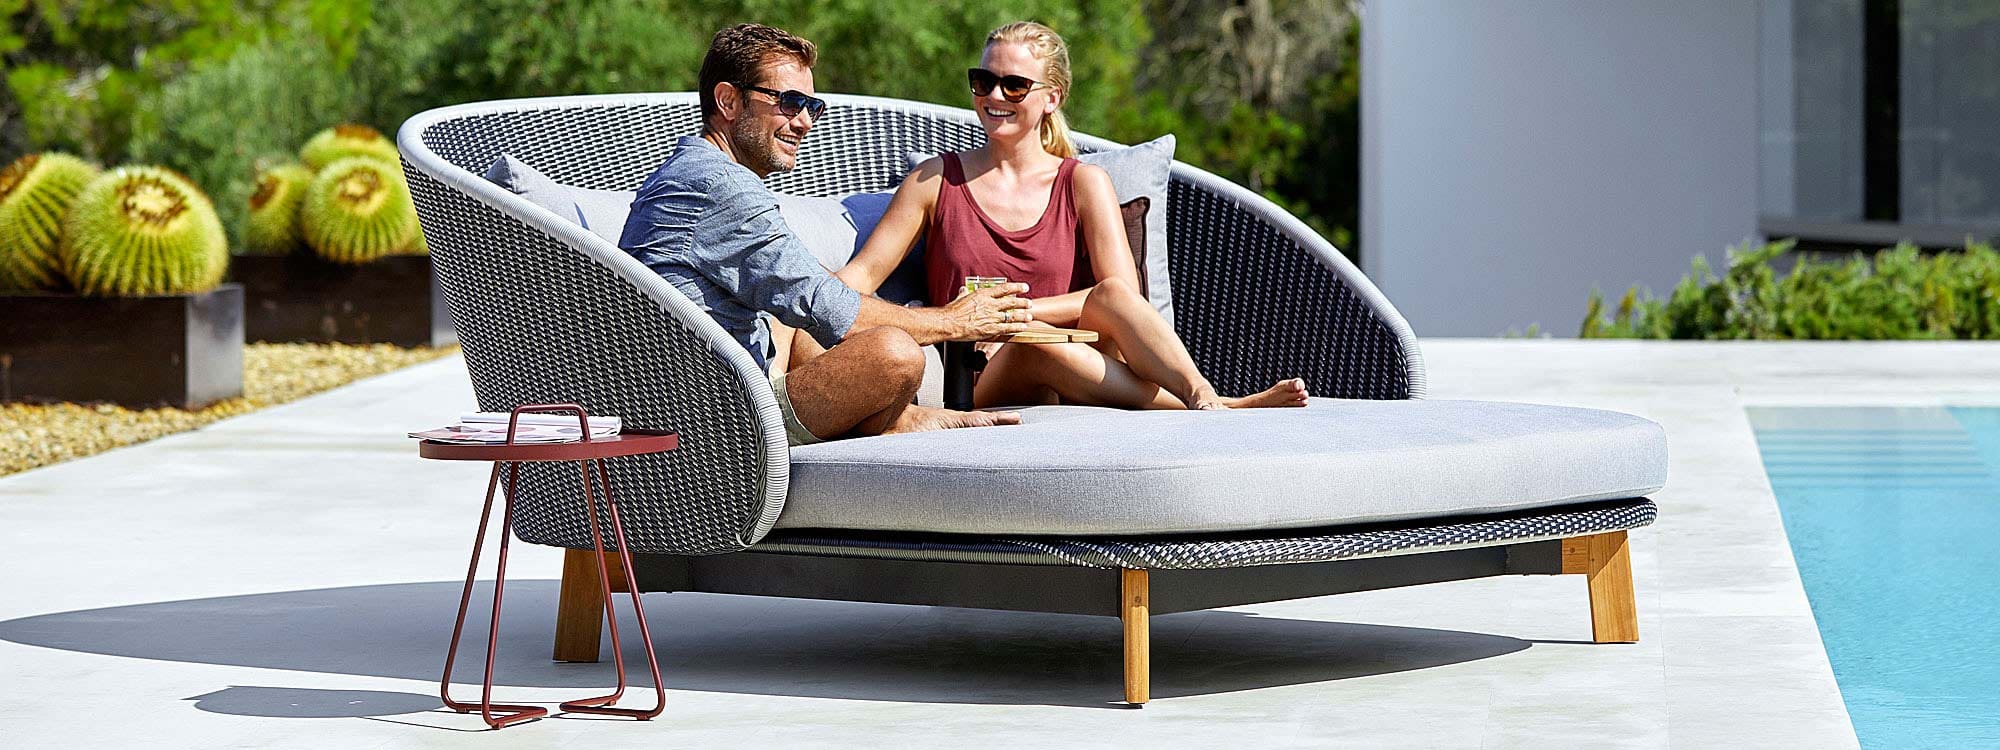 Image of couple relaxing in Cane-line Peacock twin daybed on sunny poolside